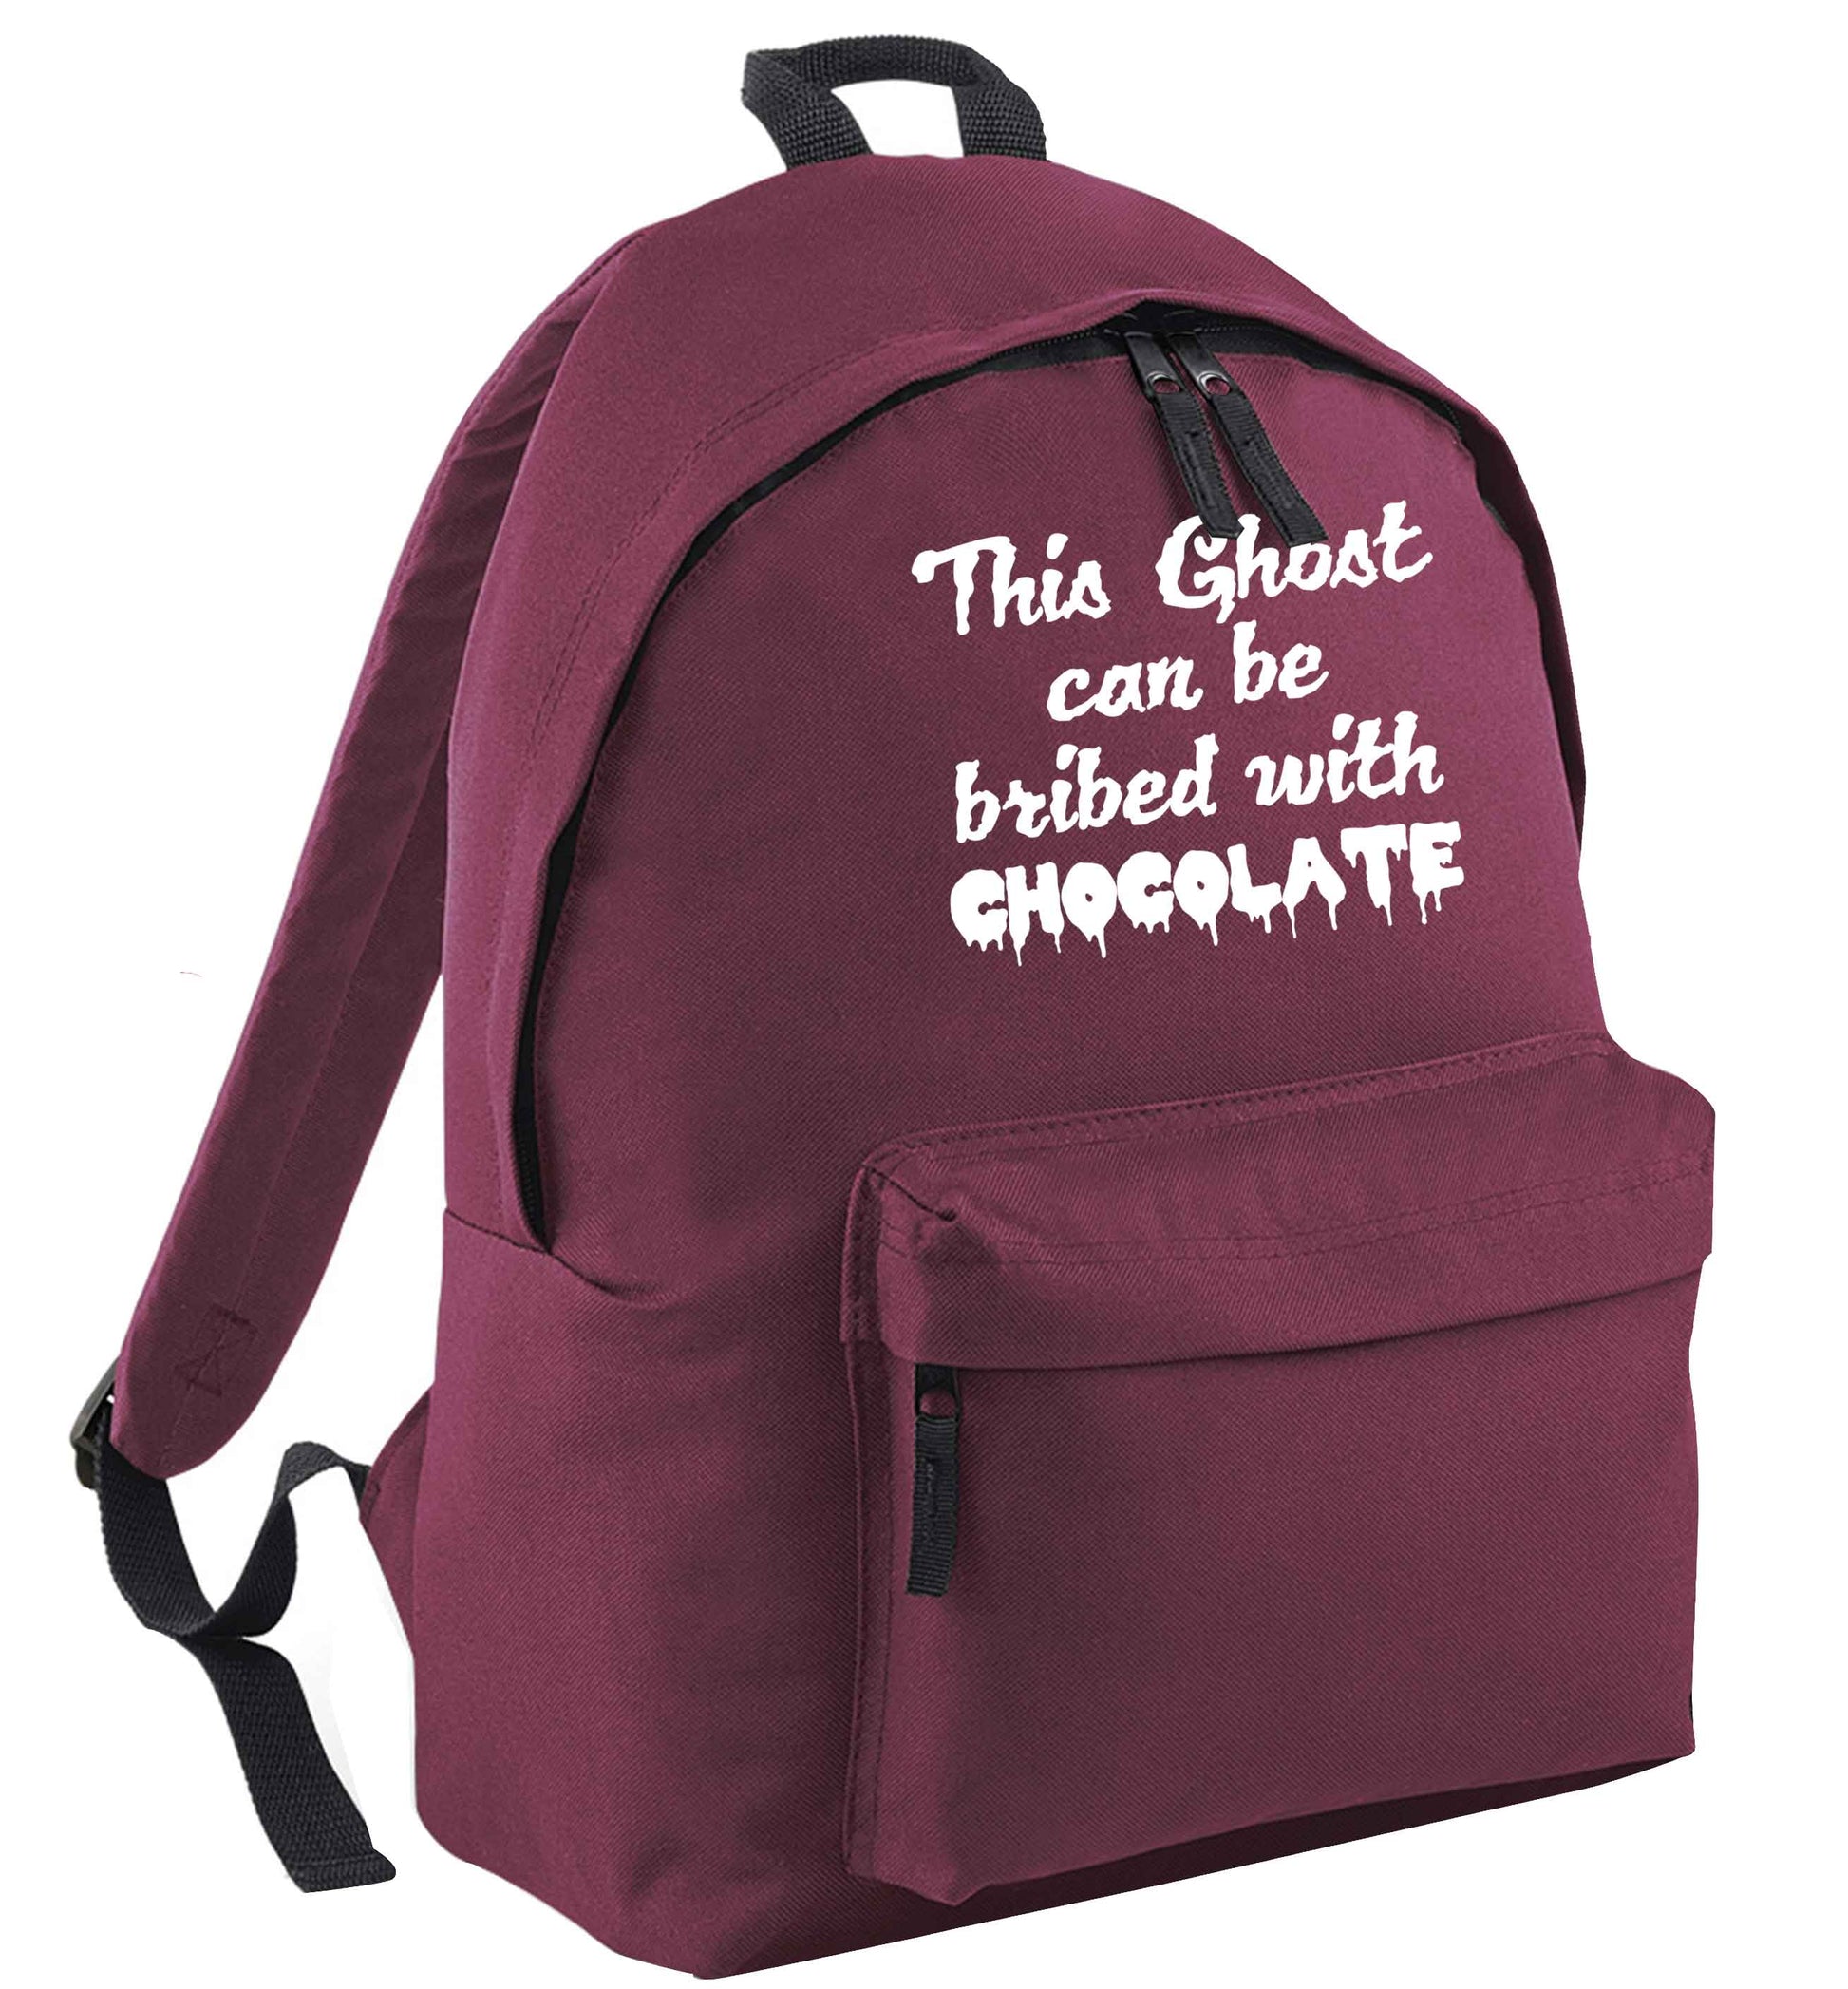 This ghost can be bribed with chocolate maroon adults backpack